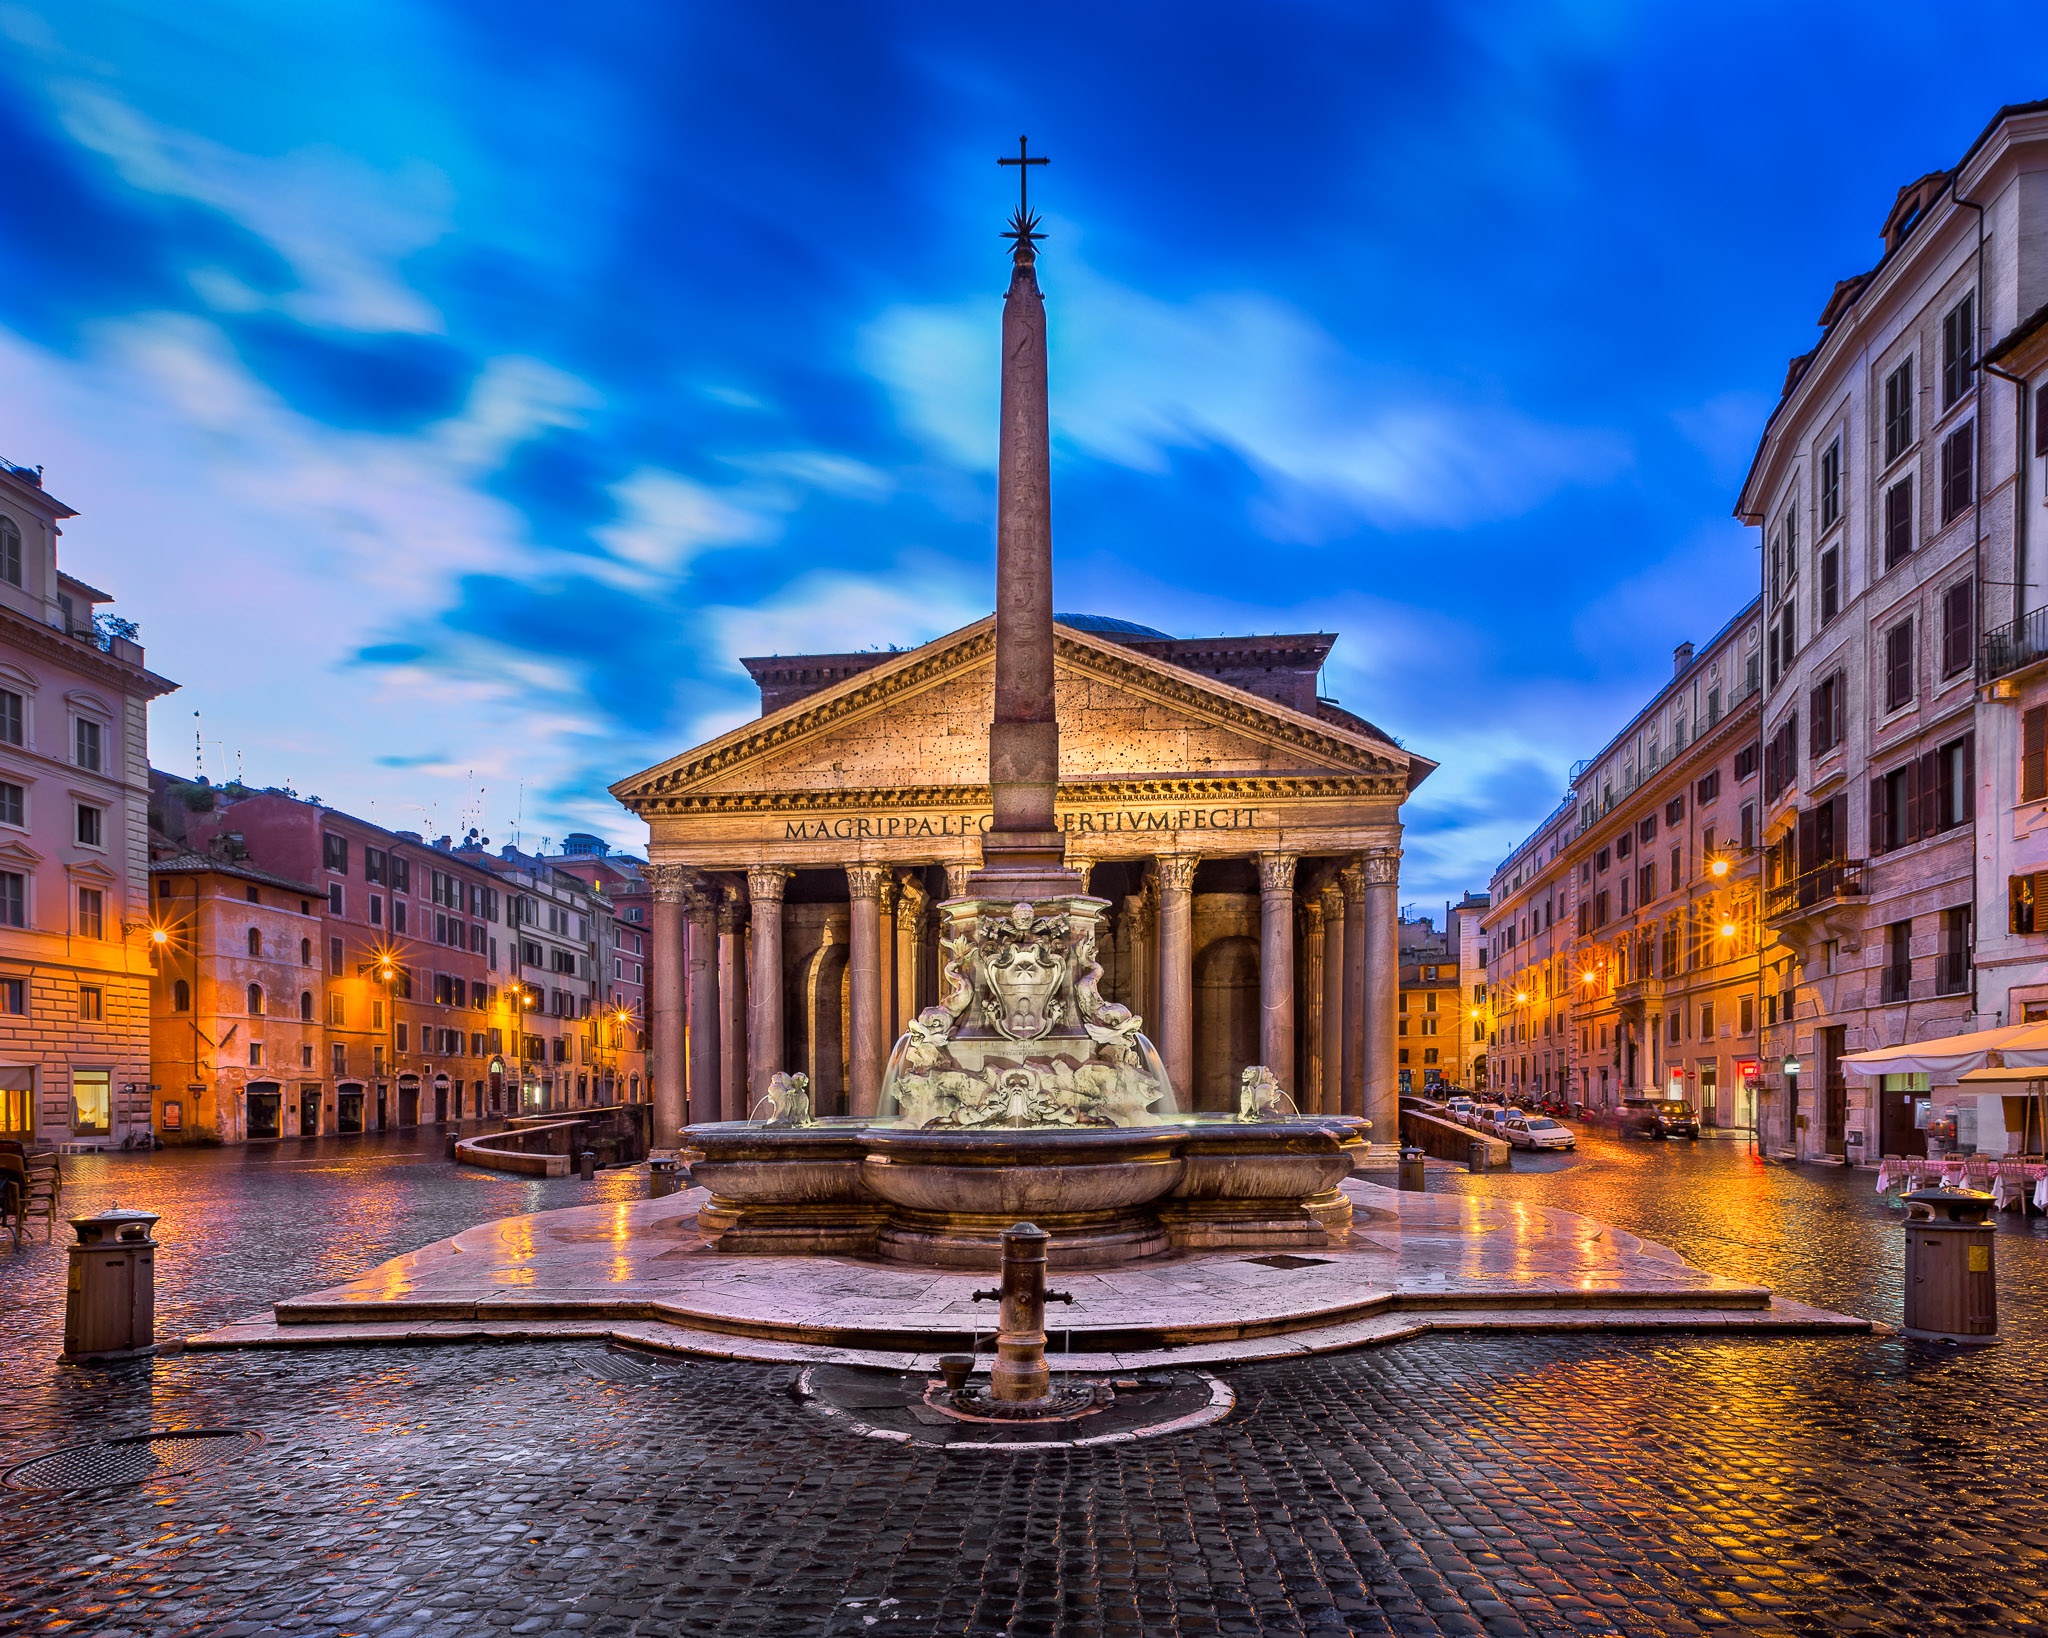 italy, rome, man made, building, city, fountain, obelisk, cities